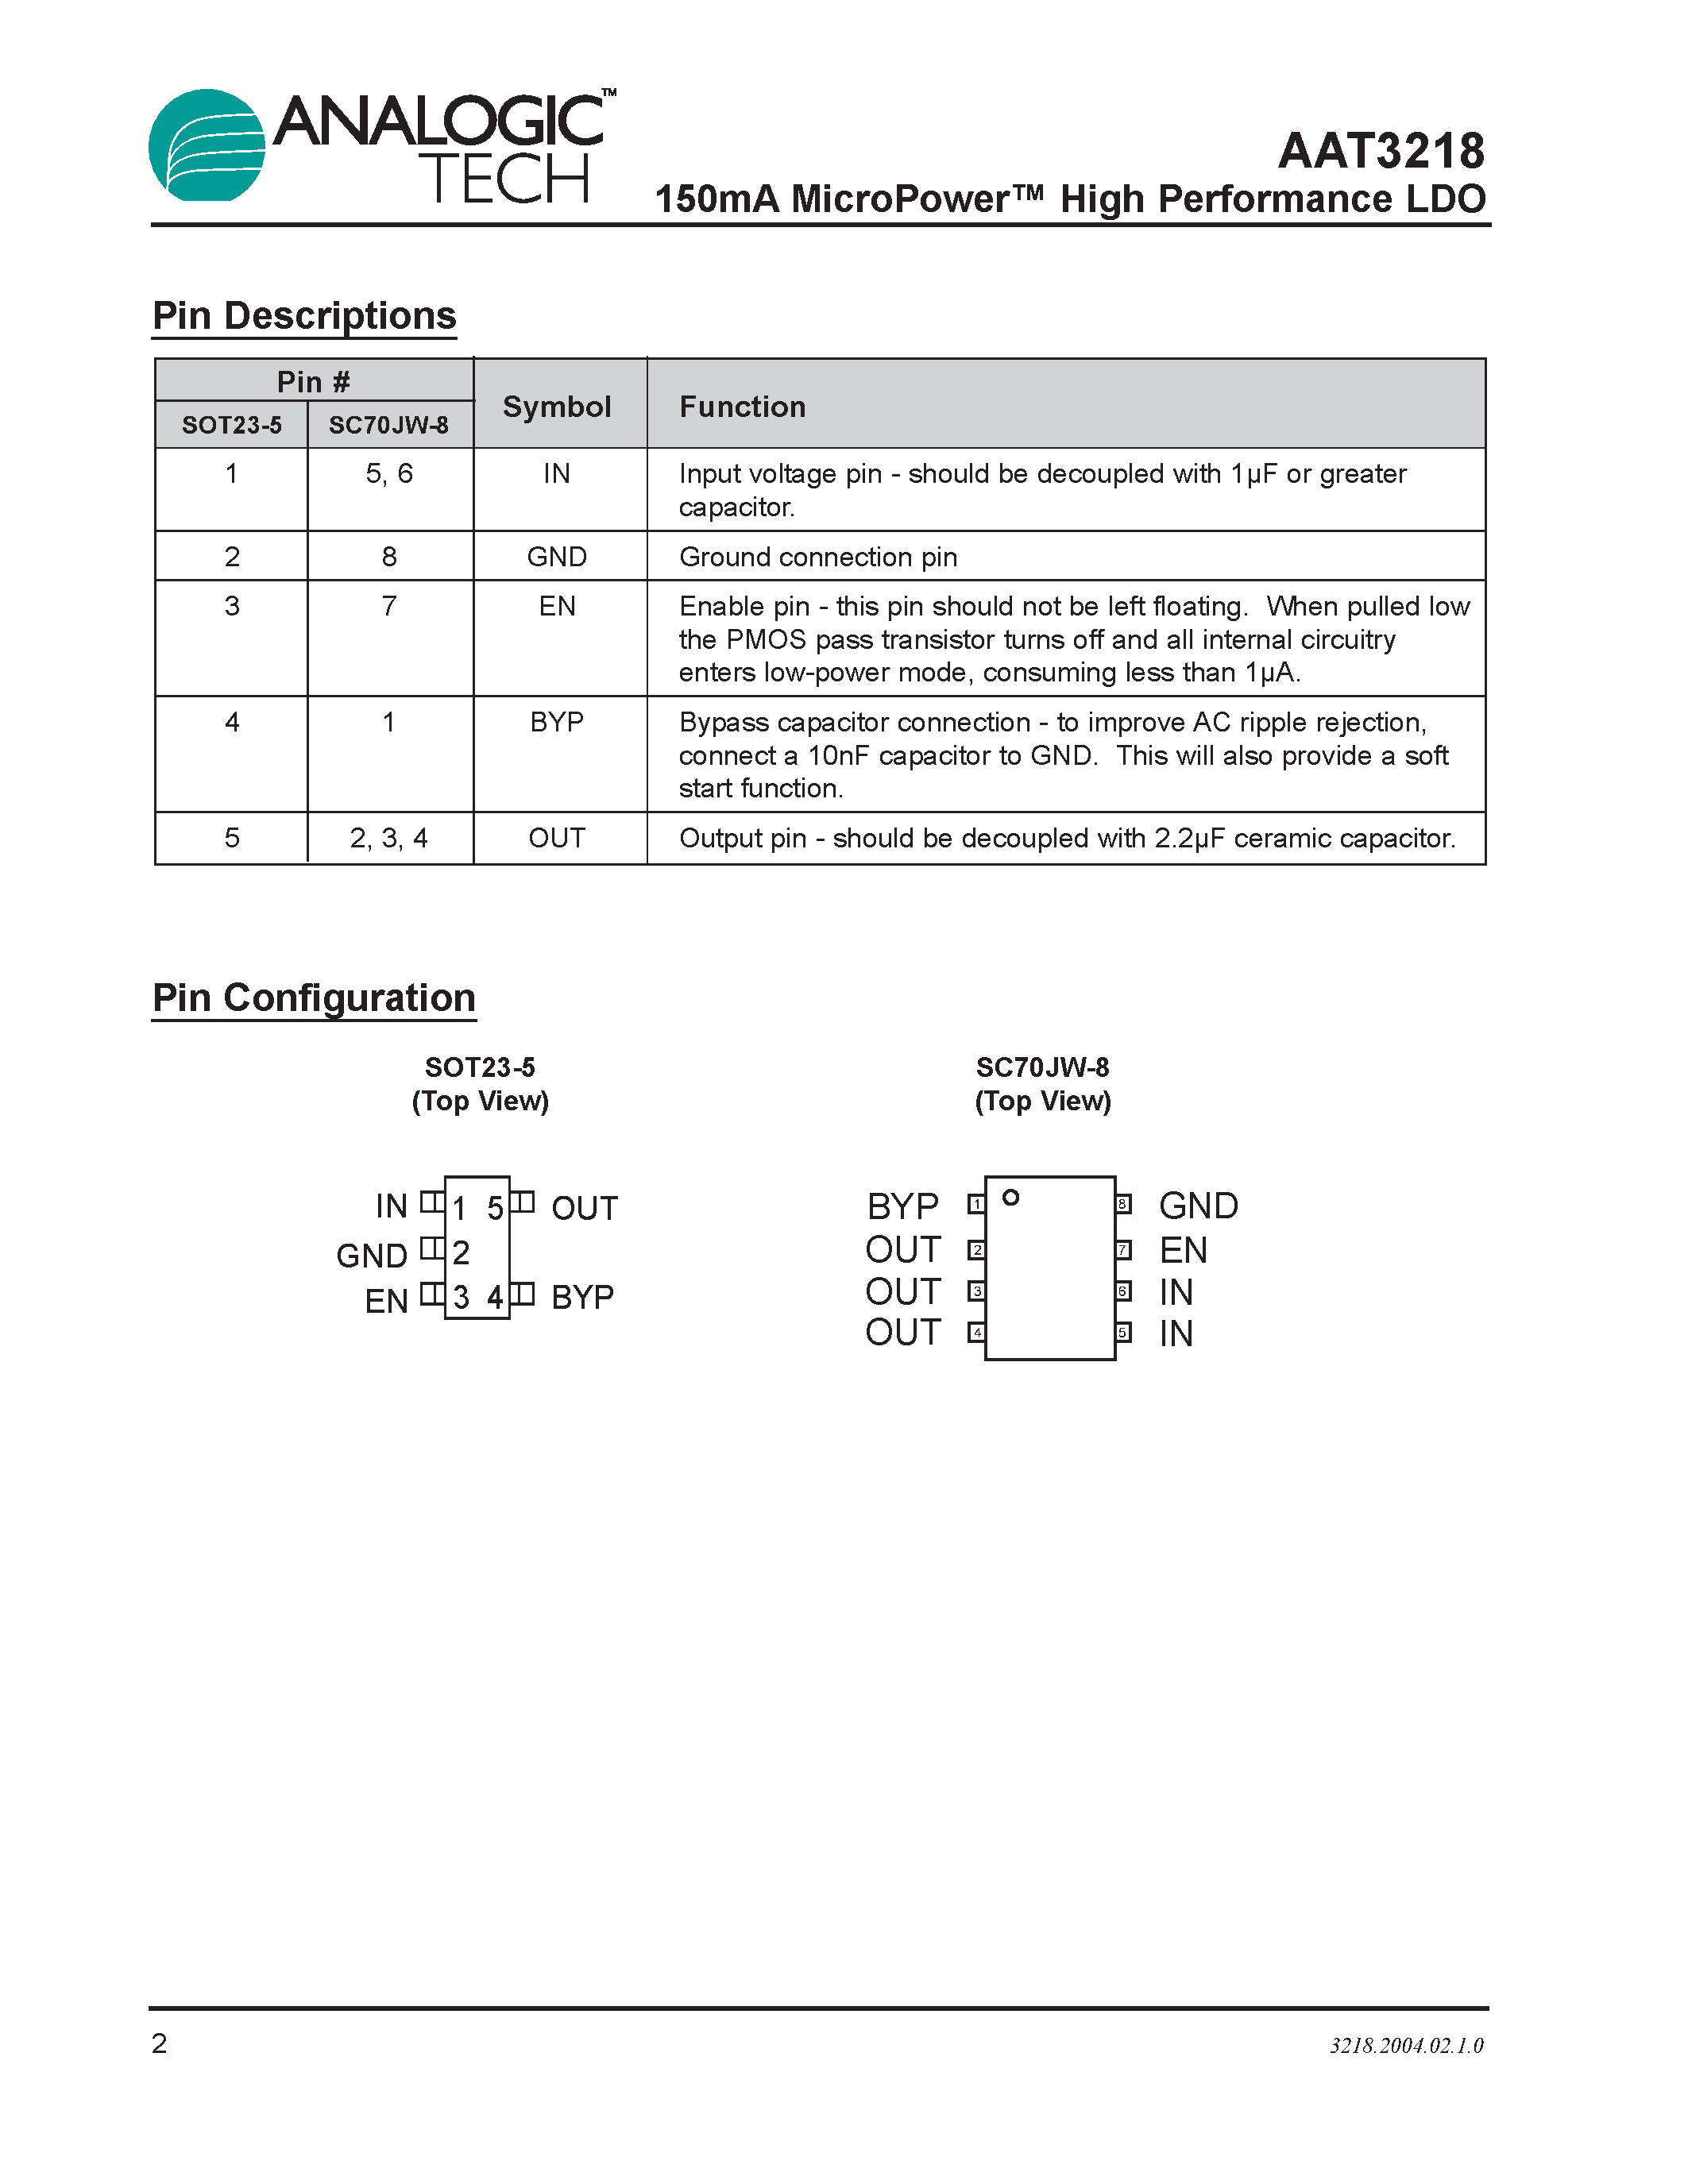 Datasheet AAT3218IJS-1.9-T1 - 150mA MicroPower High Performance LDO page 2